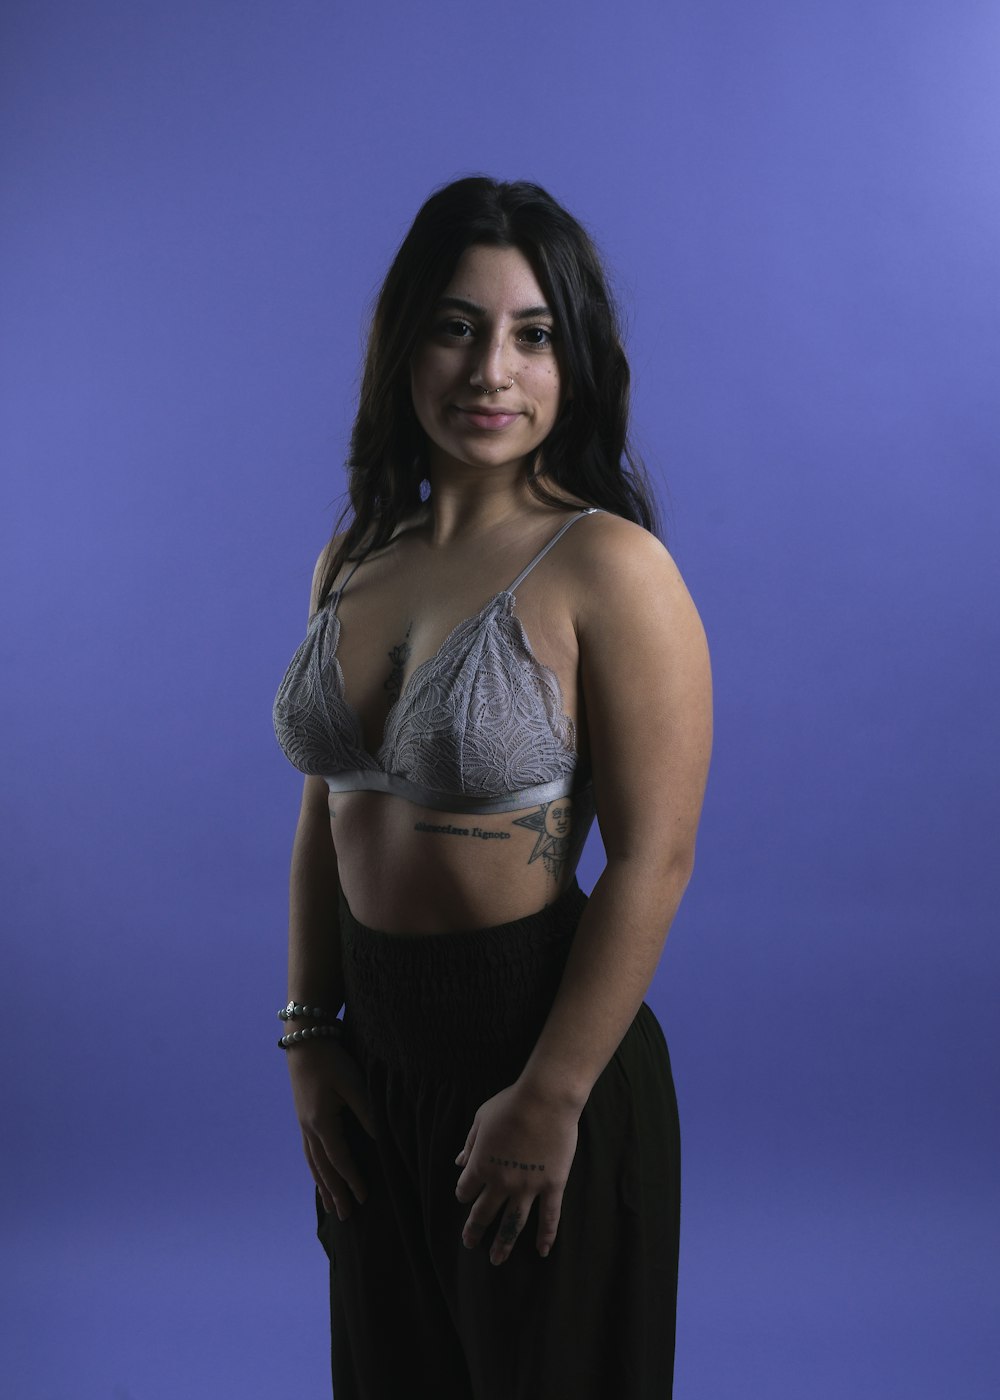 a woman in a bra top posing for a picture